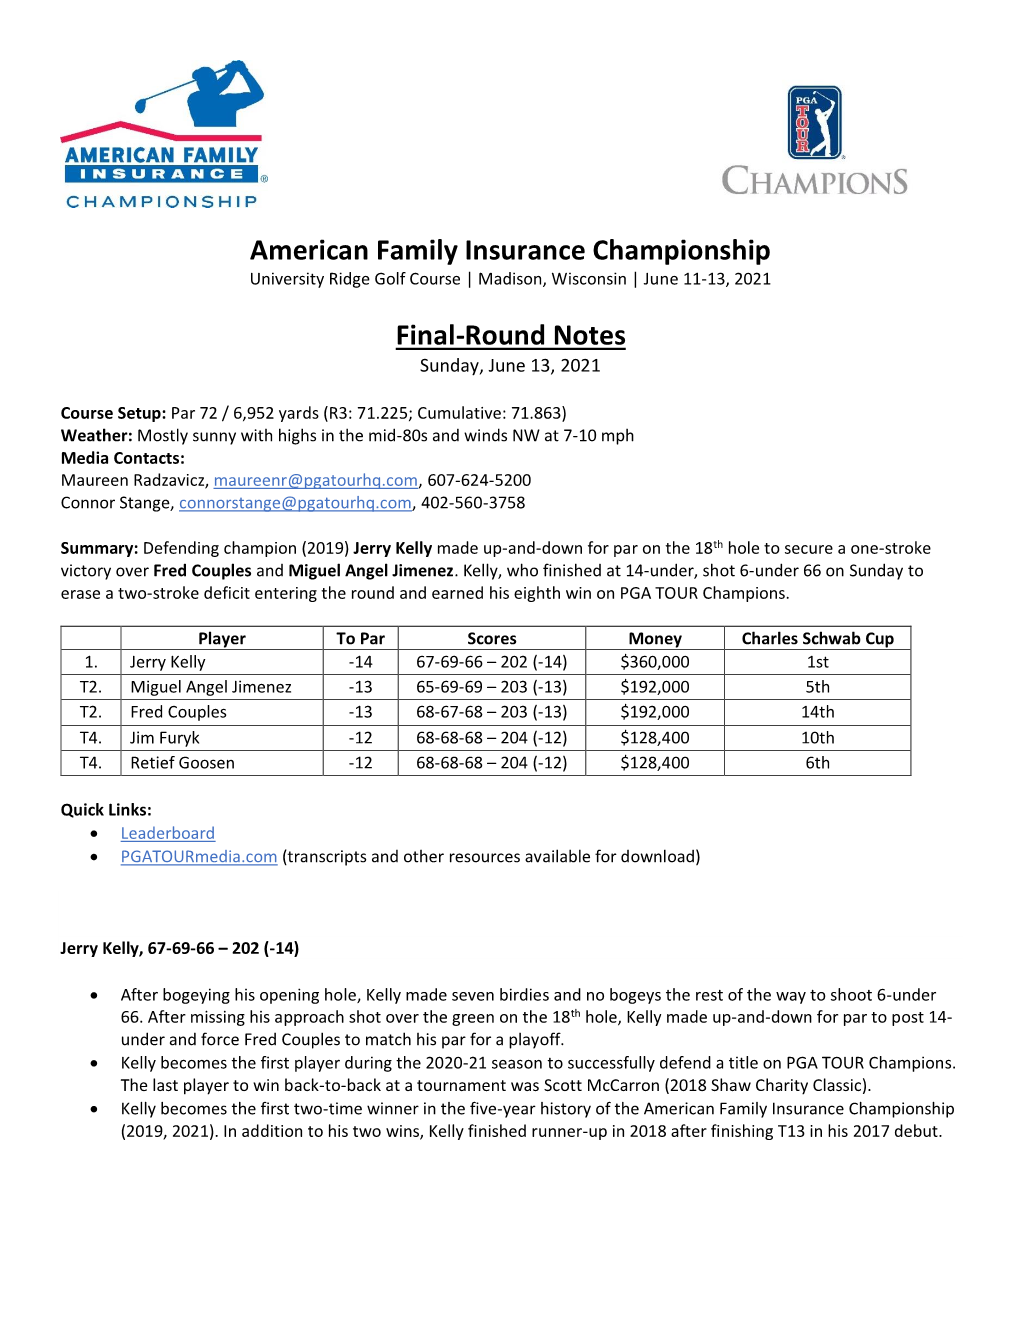 American Family Insurance Championship Final-Round Notes